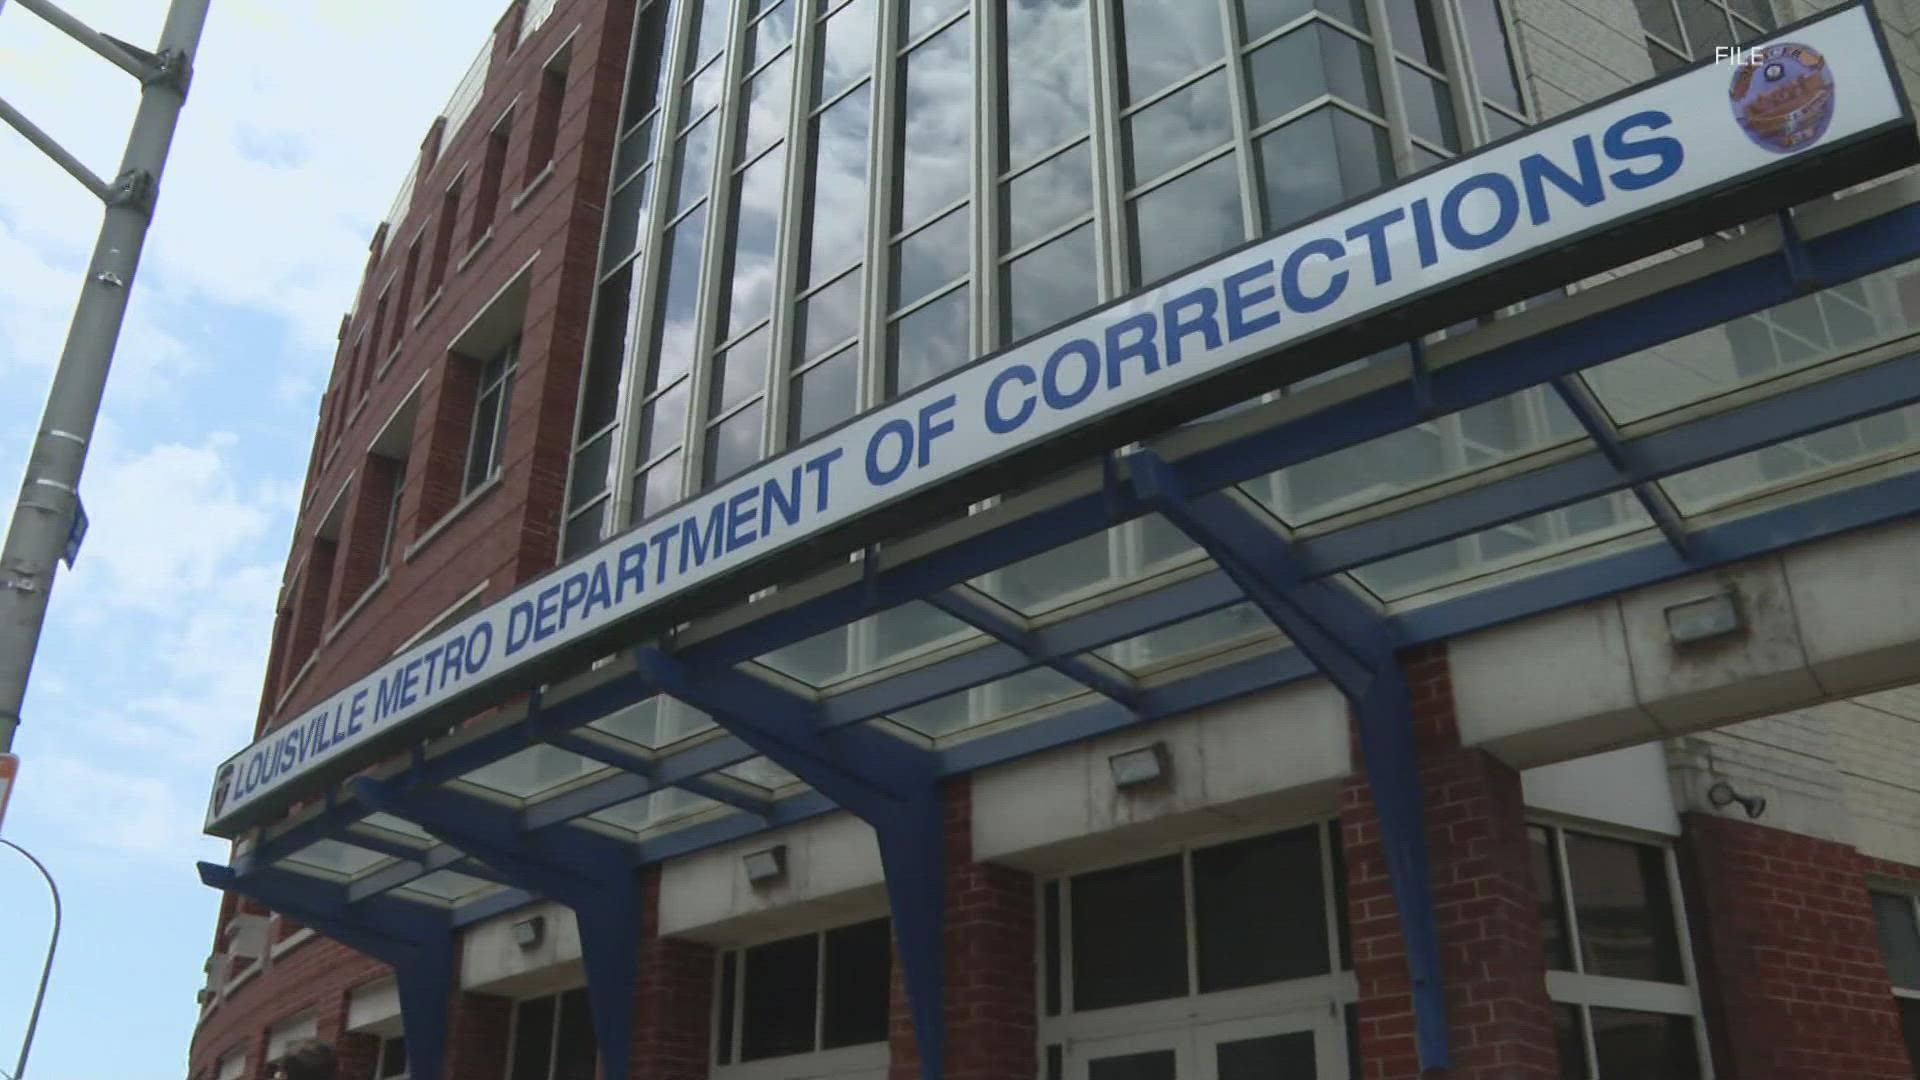 The shortage of officers within Louisville Metro Corrections has led to a huge increase in overtime pay. The jail said change is needed but progress is a process.